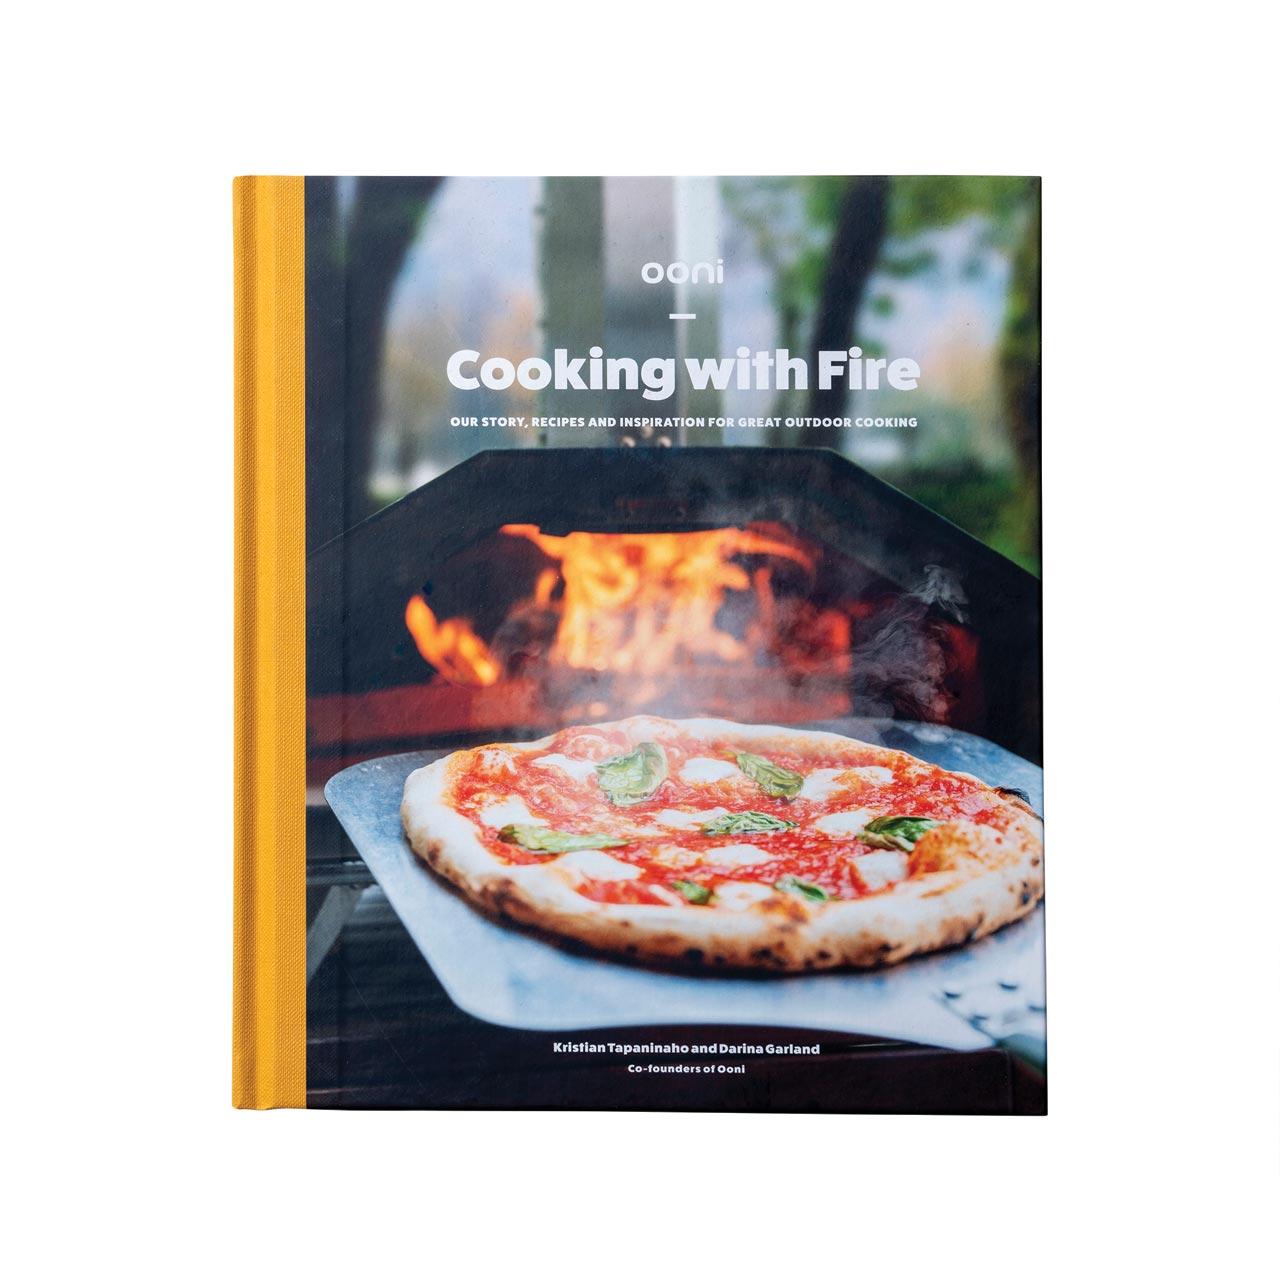 Ooni Pizza-Kochbuch "Cooking with Fire"